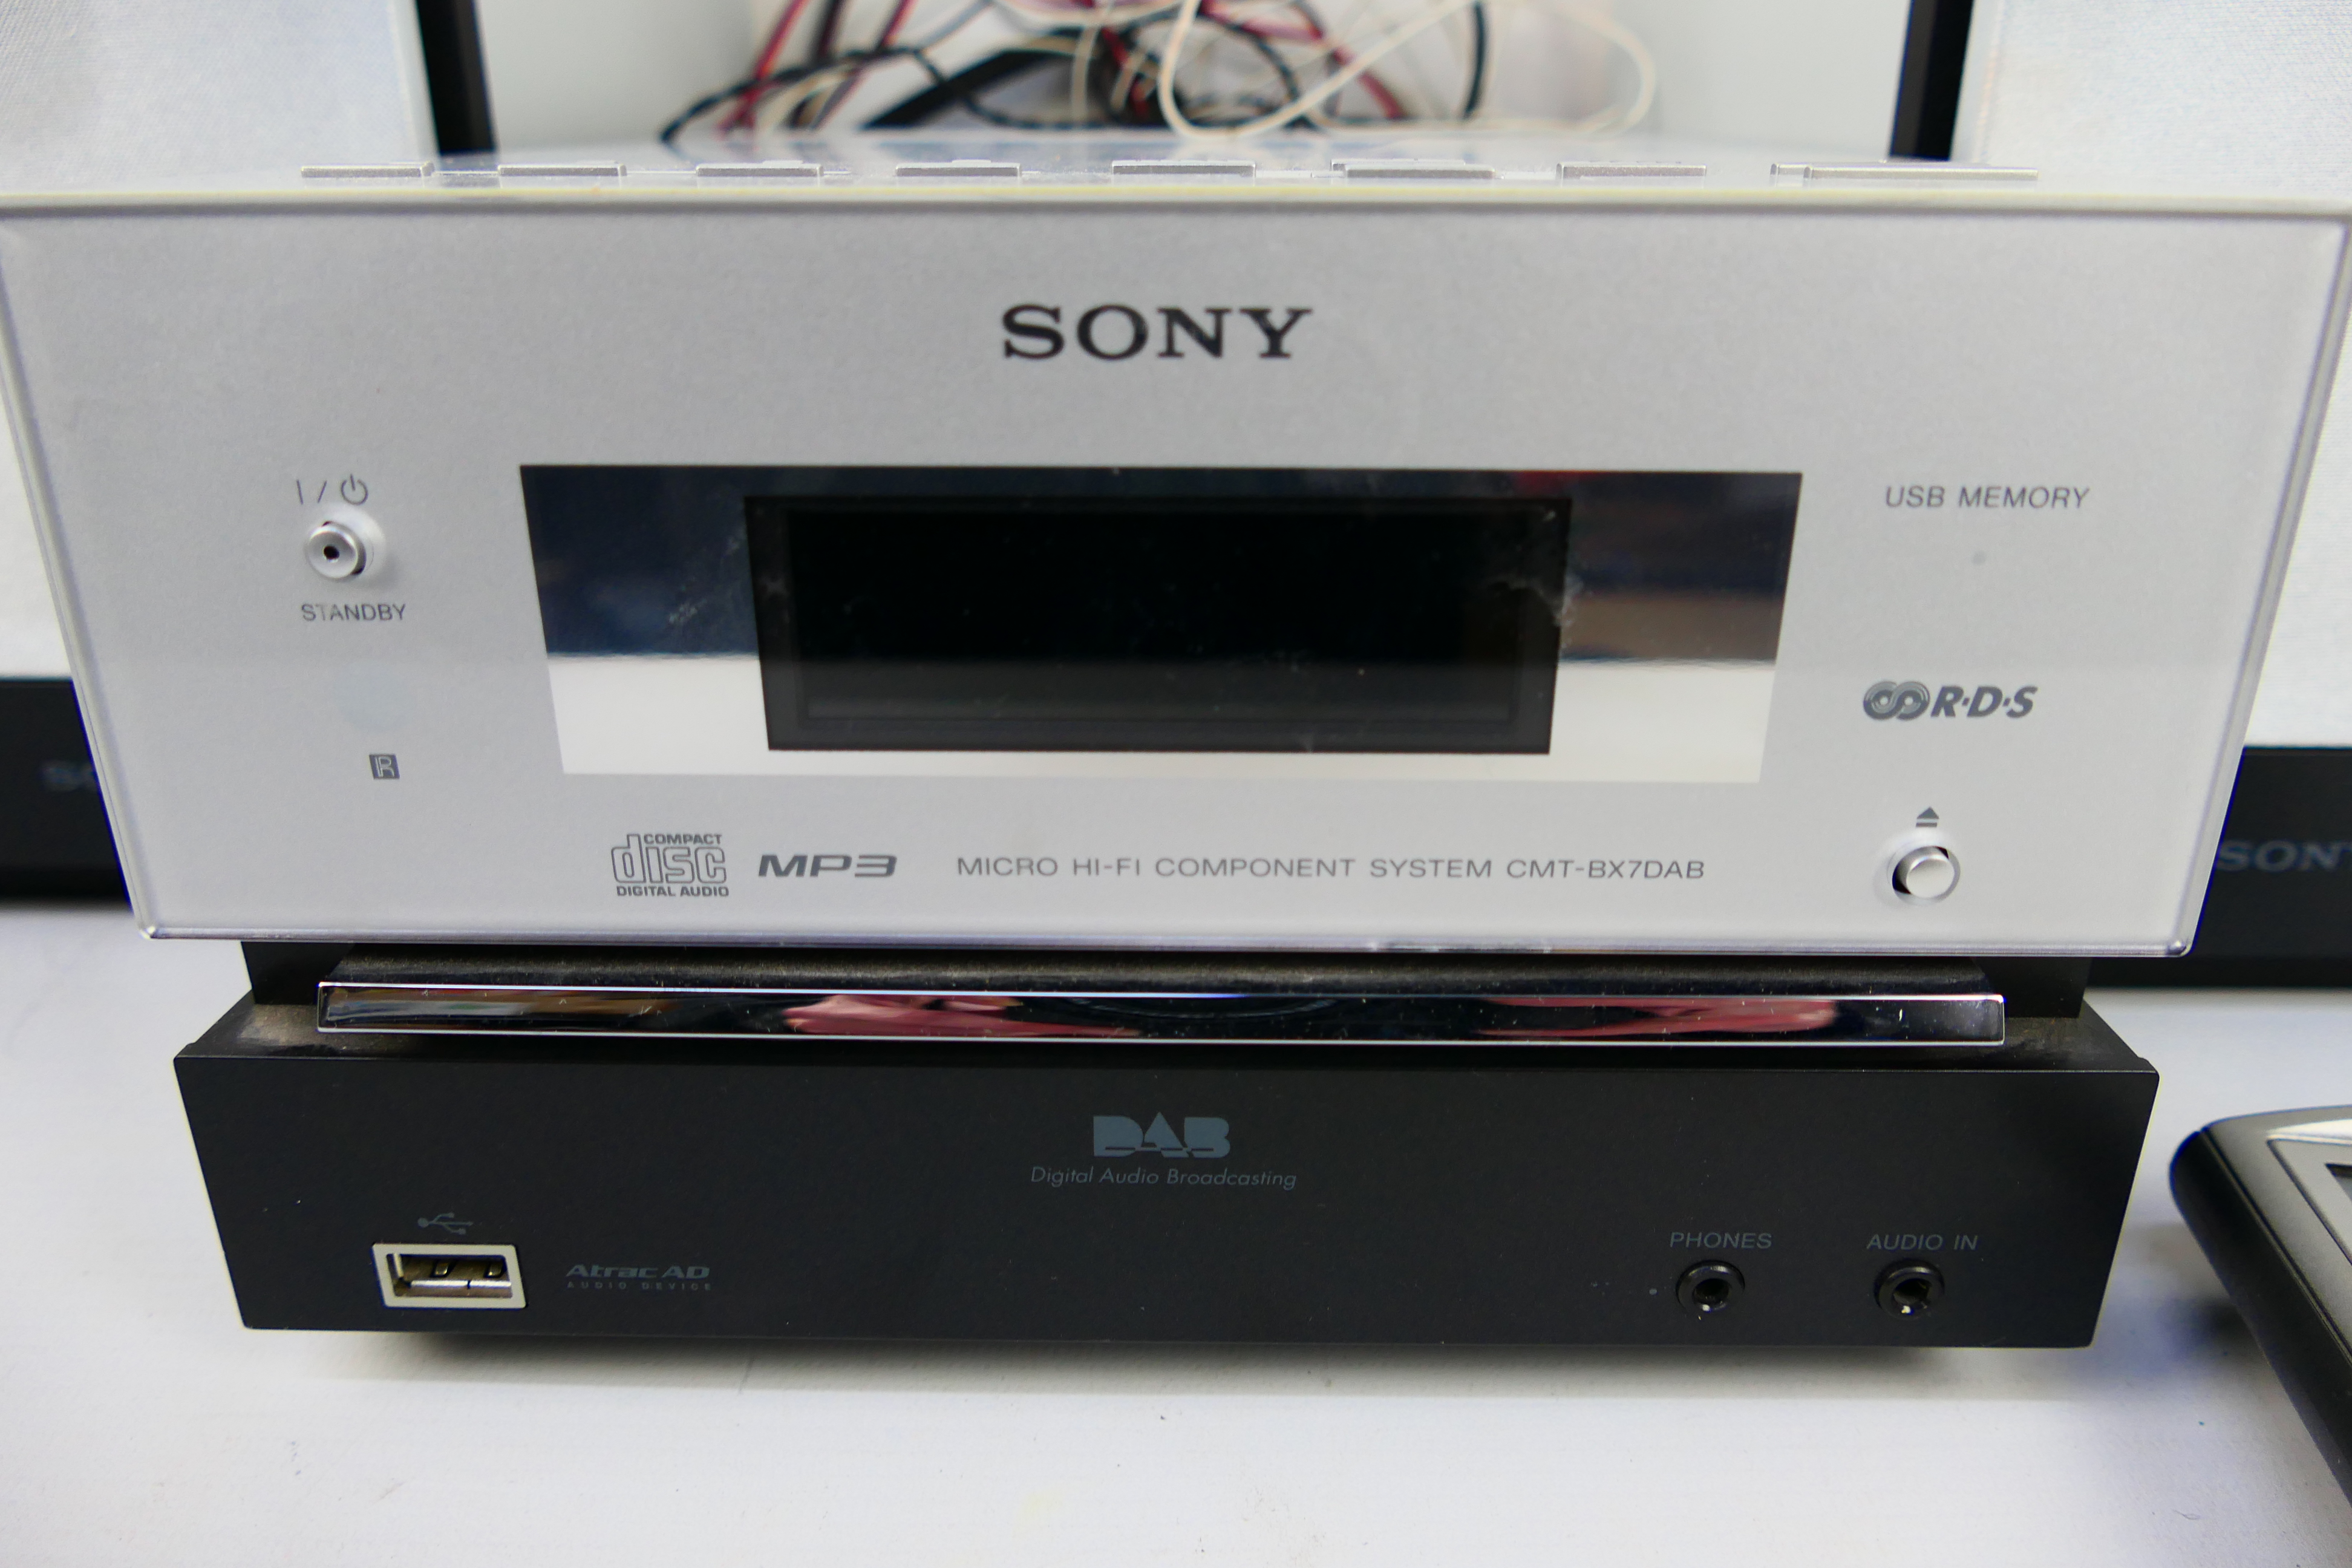 A Sony Micro Hi-Fi Component System CMT-BX7DAB with two speakers and a Tom Tom Sat Nav. - Image 2 of 2